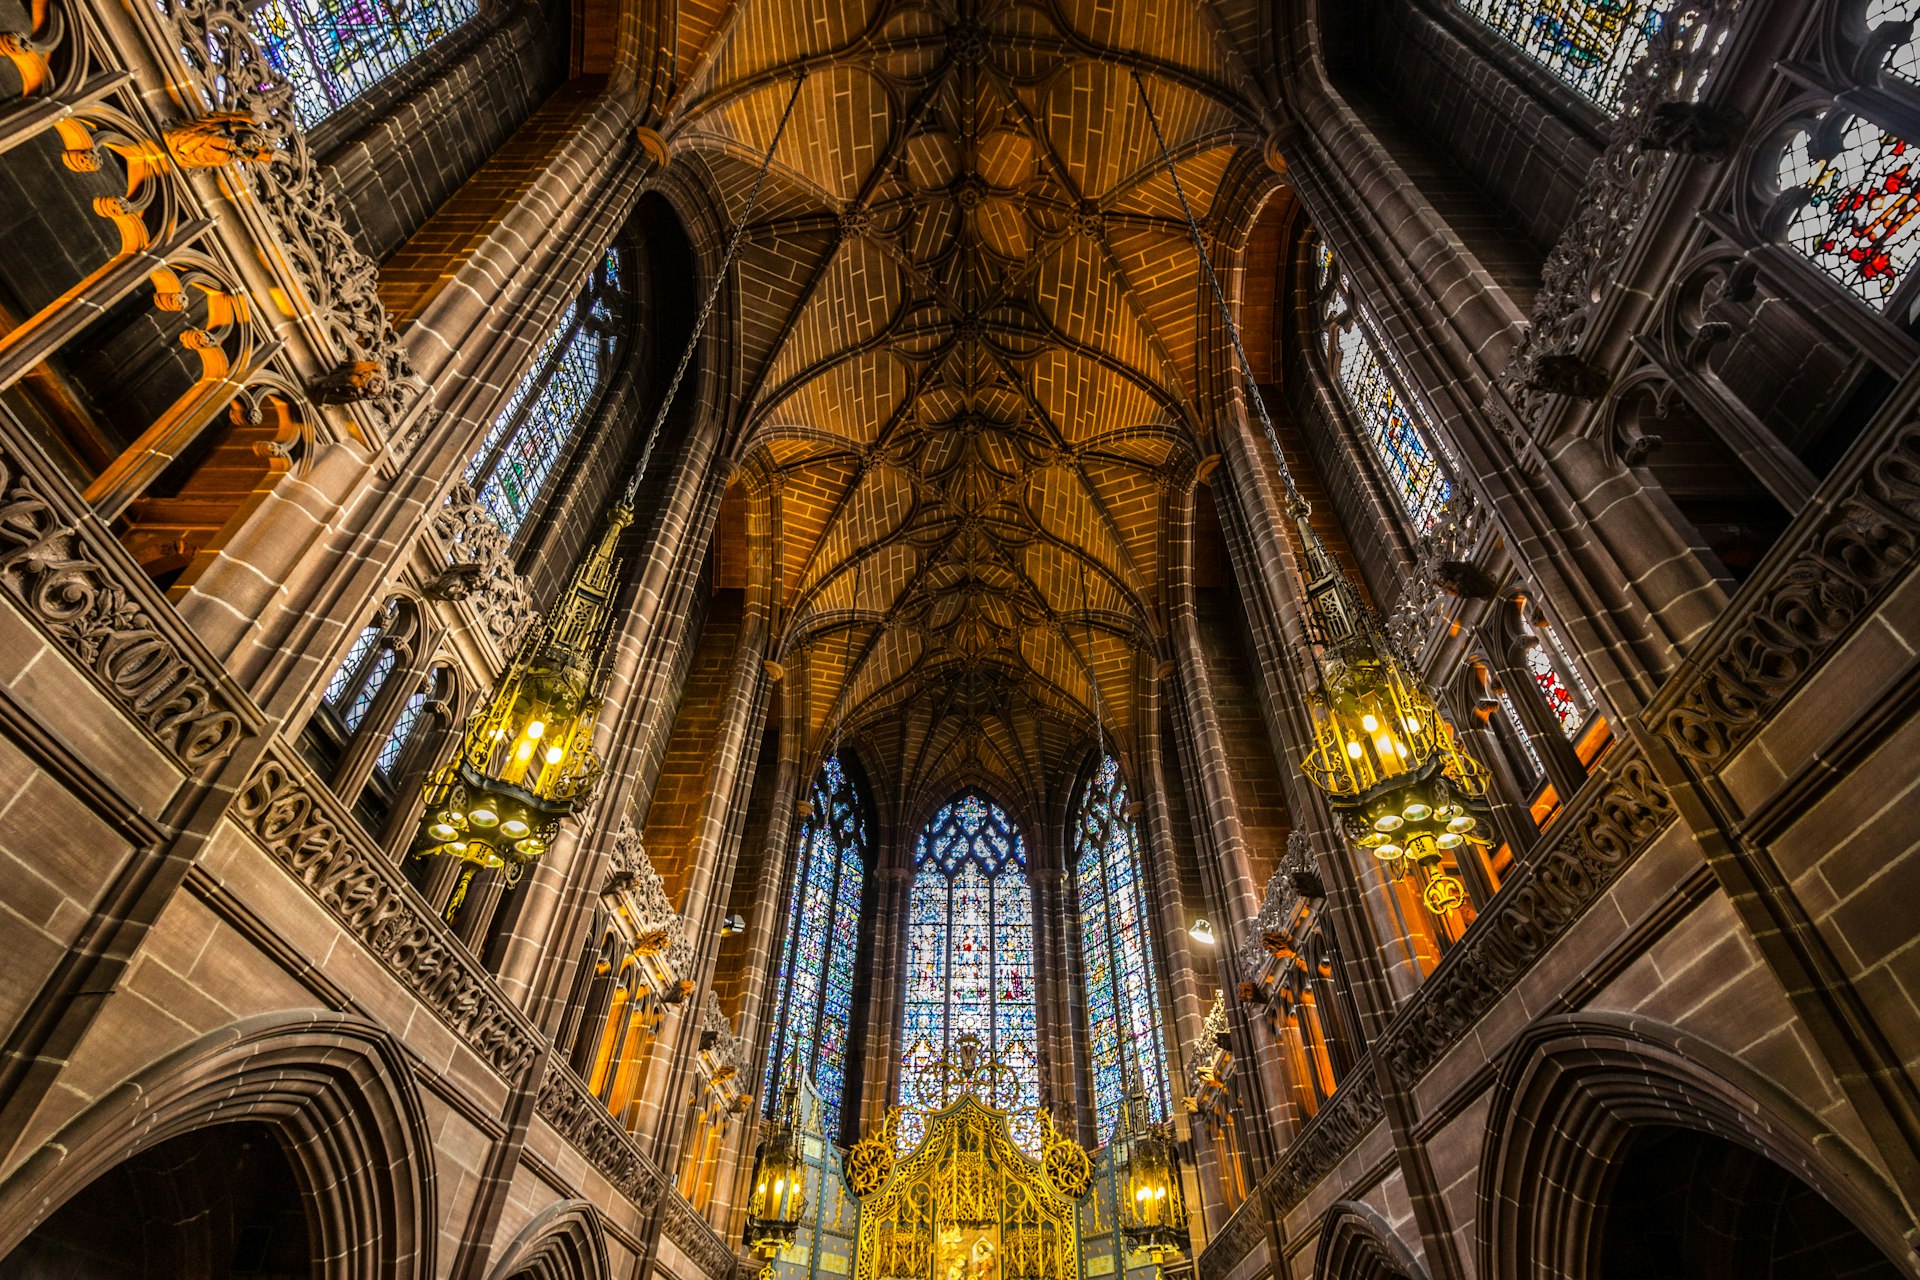 The interior of Liverpool Anglican cathedral